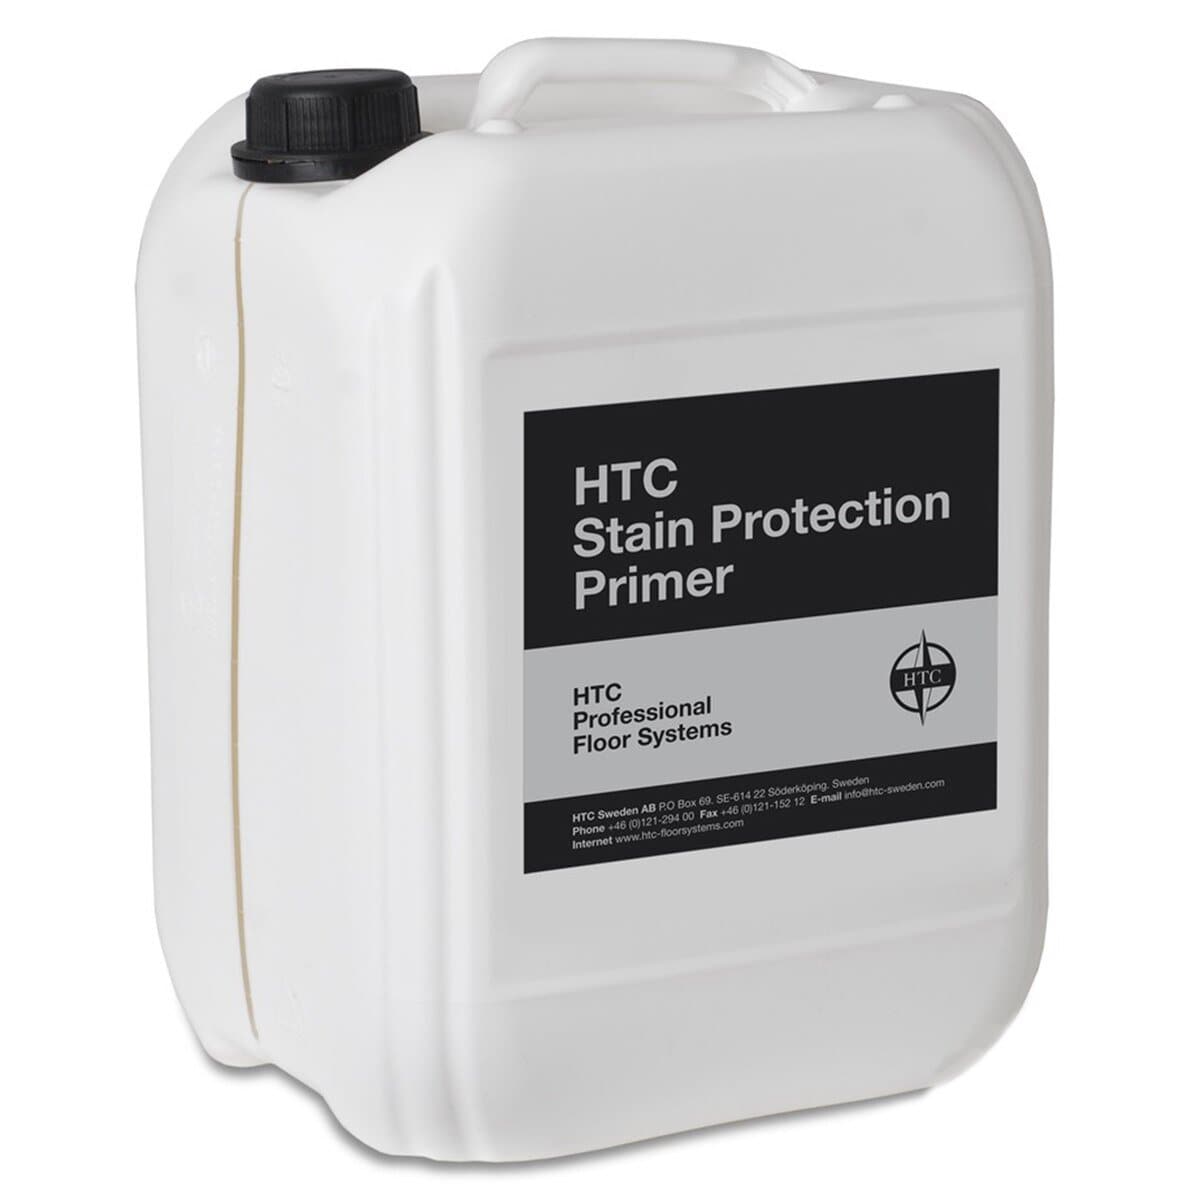 HTC Stain Protection Primer - HTC Floor Systems